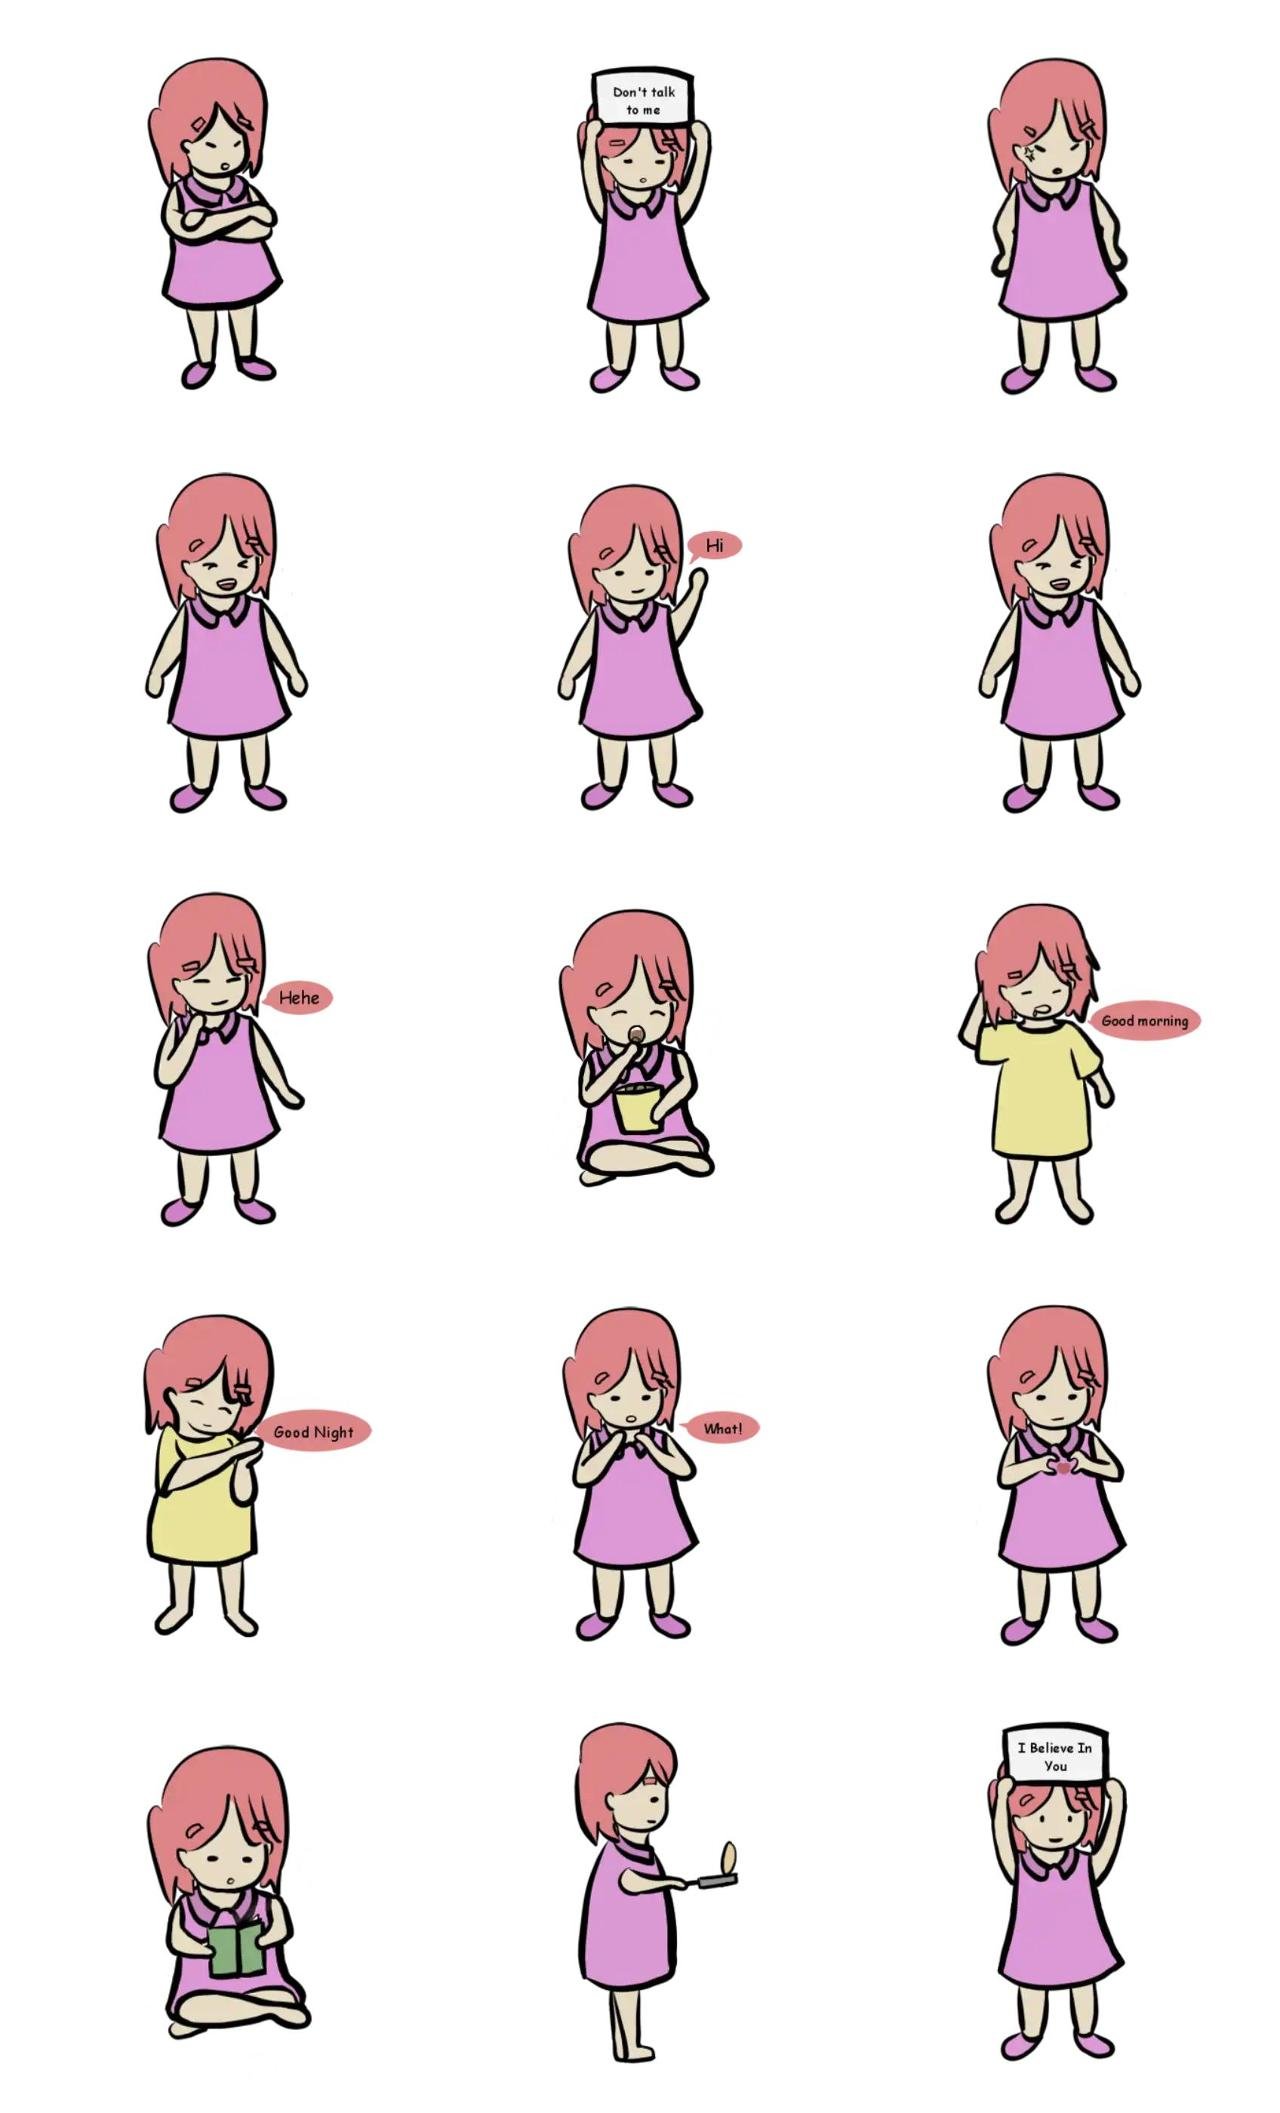 Cute girl Animation/Cartoon sticker pack for Whatsapp, Telegram, Signal, and others chatting and message apps